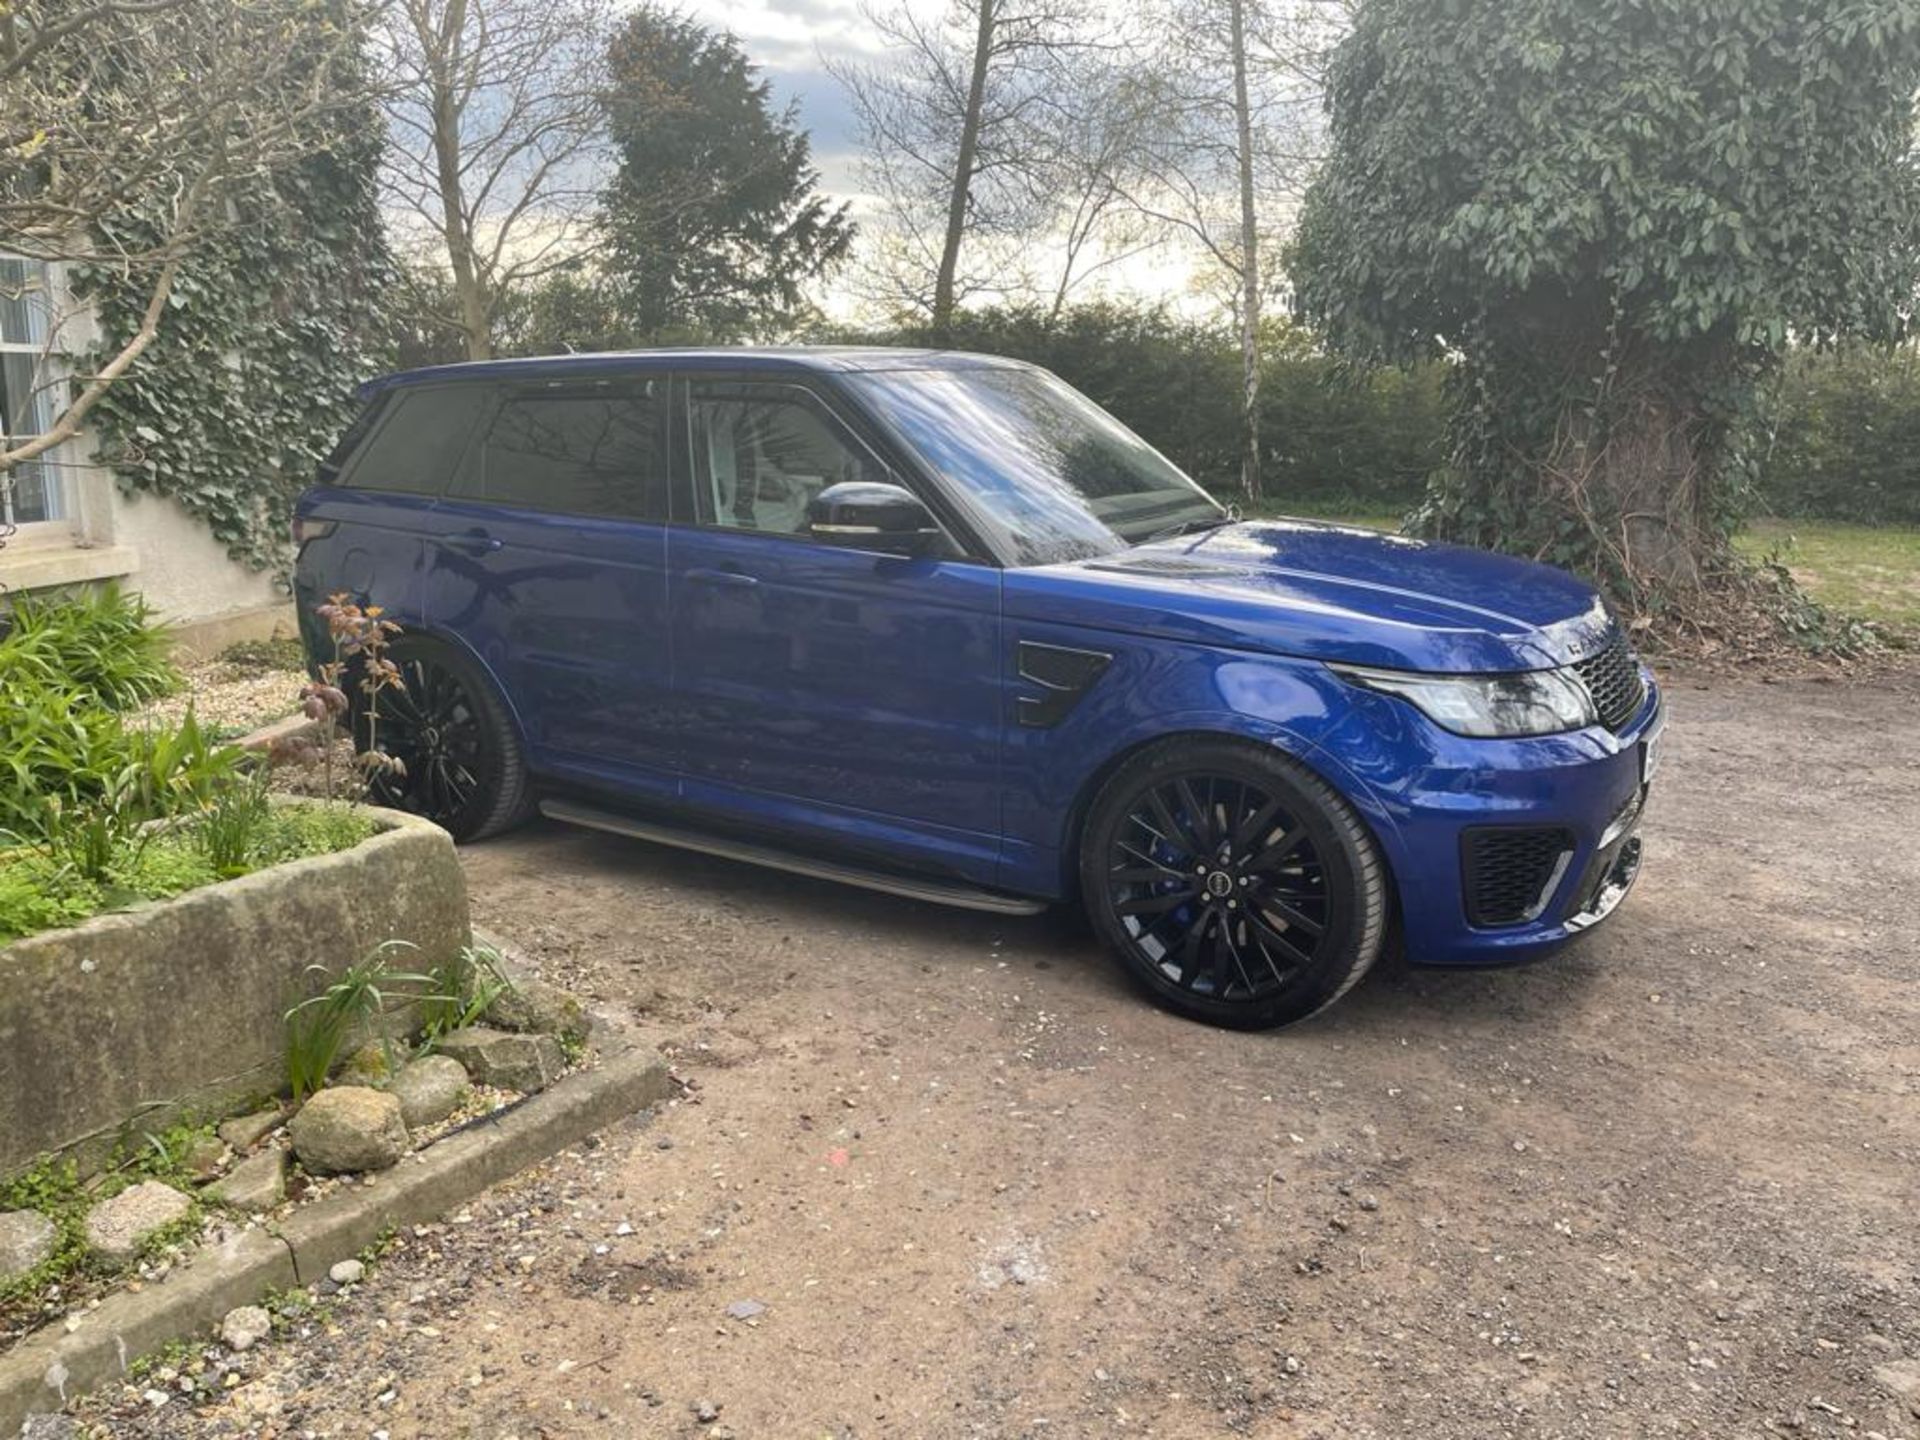 2016 RANGE ROVER SPORT SVR AUTOBIOGRAPHY DYNAMIC V8 SUPERCHARGED AUTOMATIC 5.0 550PS PETROL ENGINE - Image 8 of 28